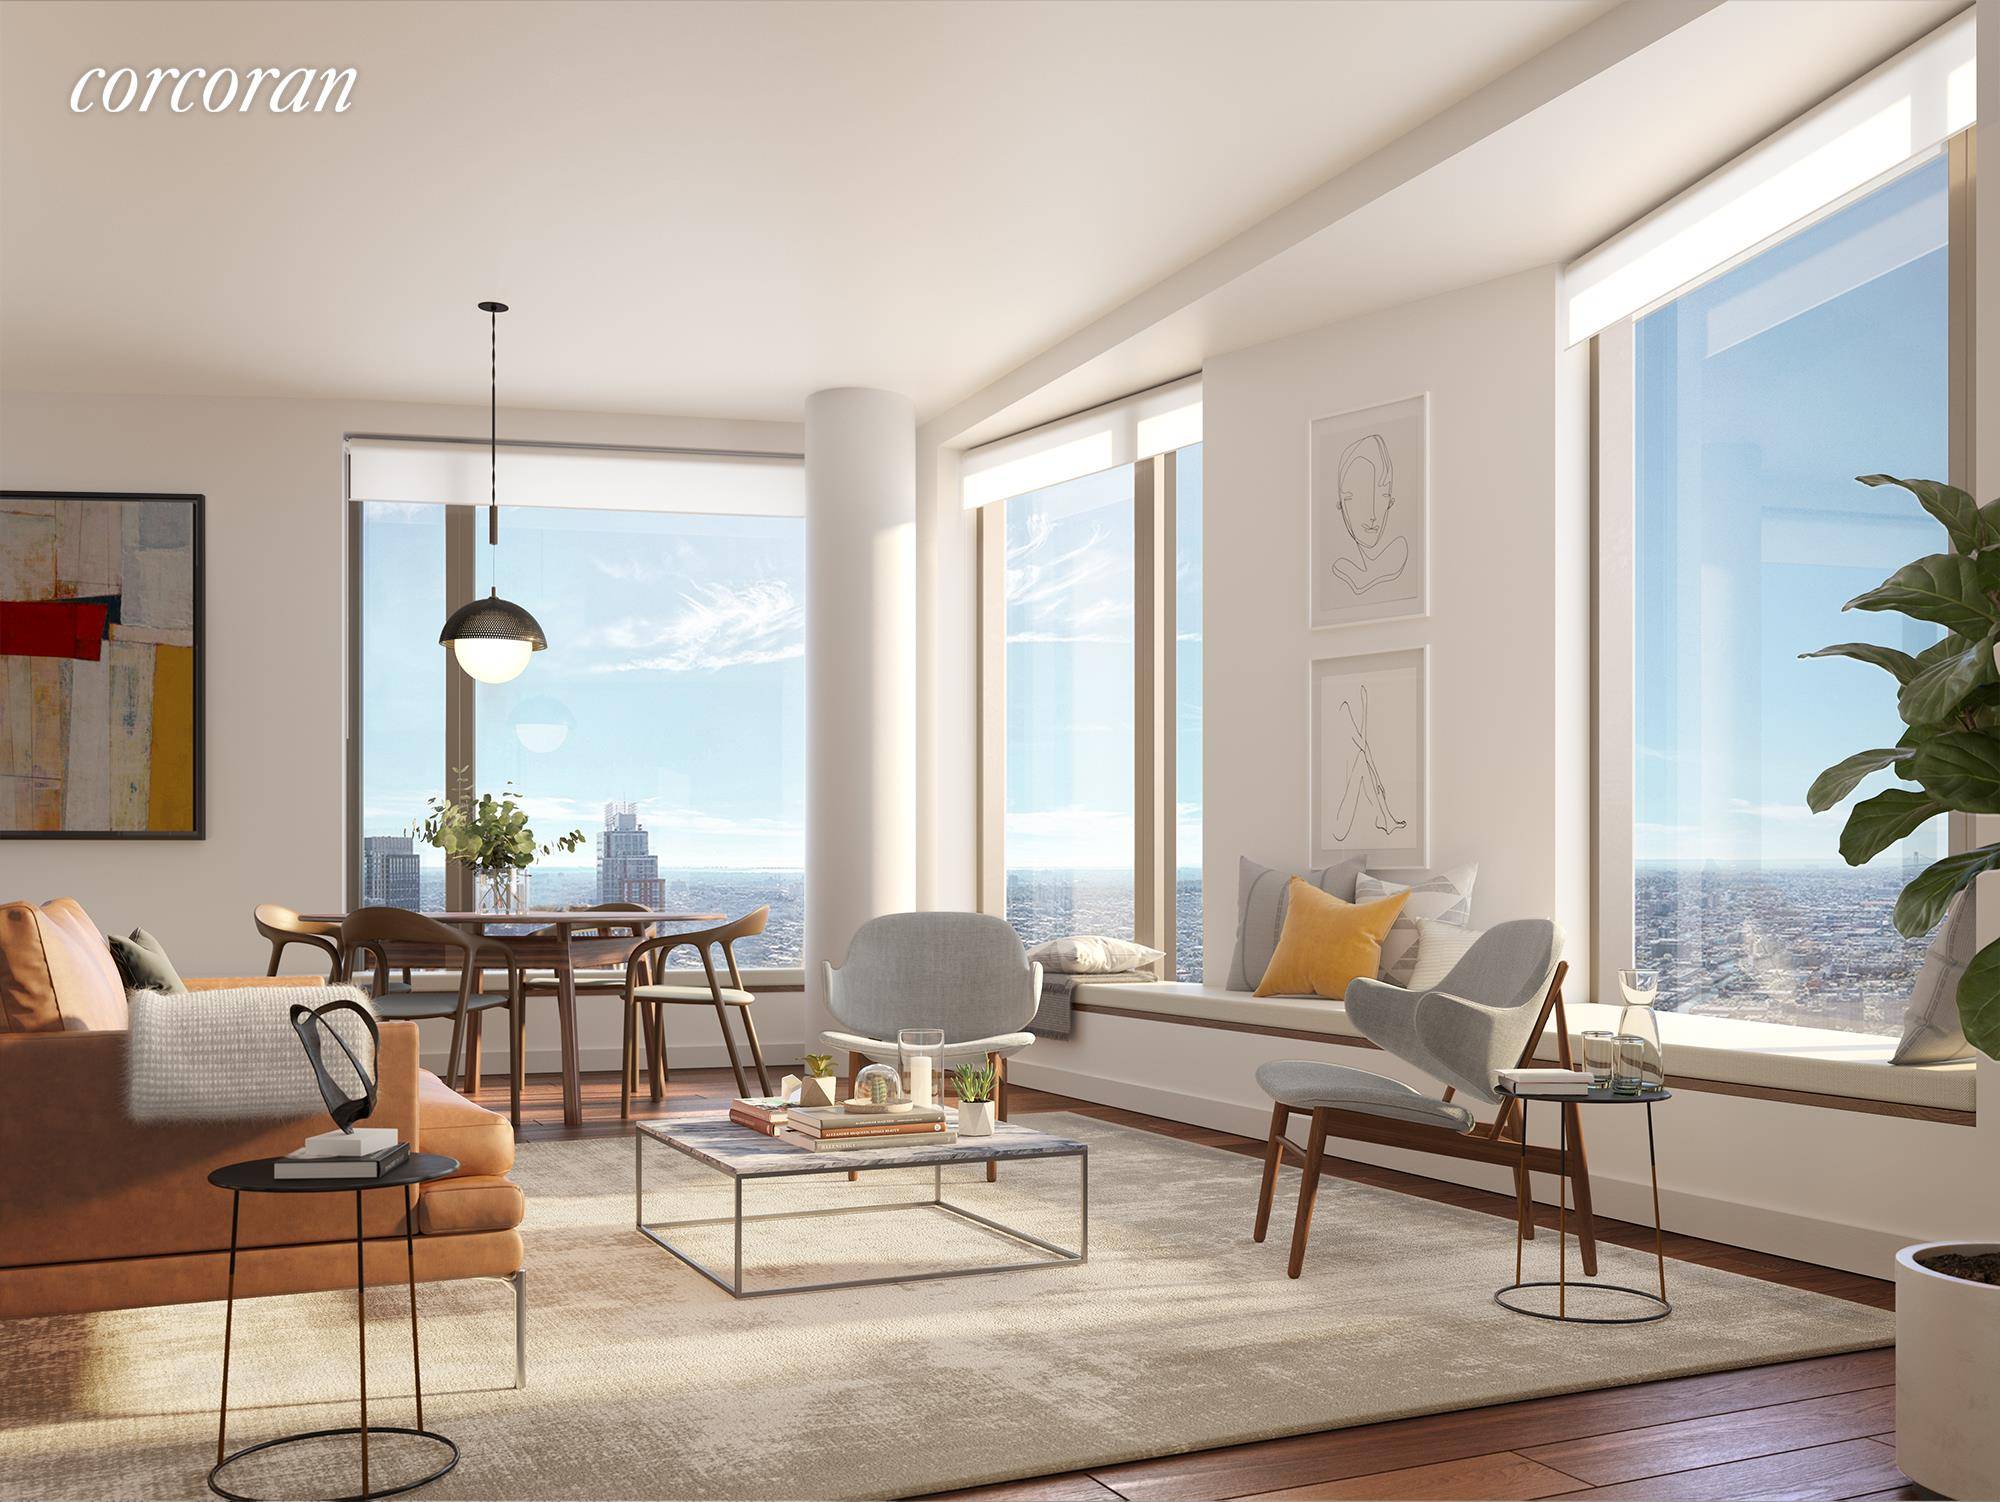 Tishman SpeyerA s 11 Hoyt sets BrooklynA s new standard for architecture and design.